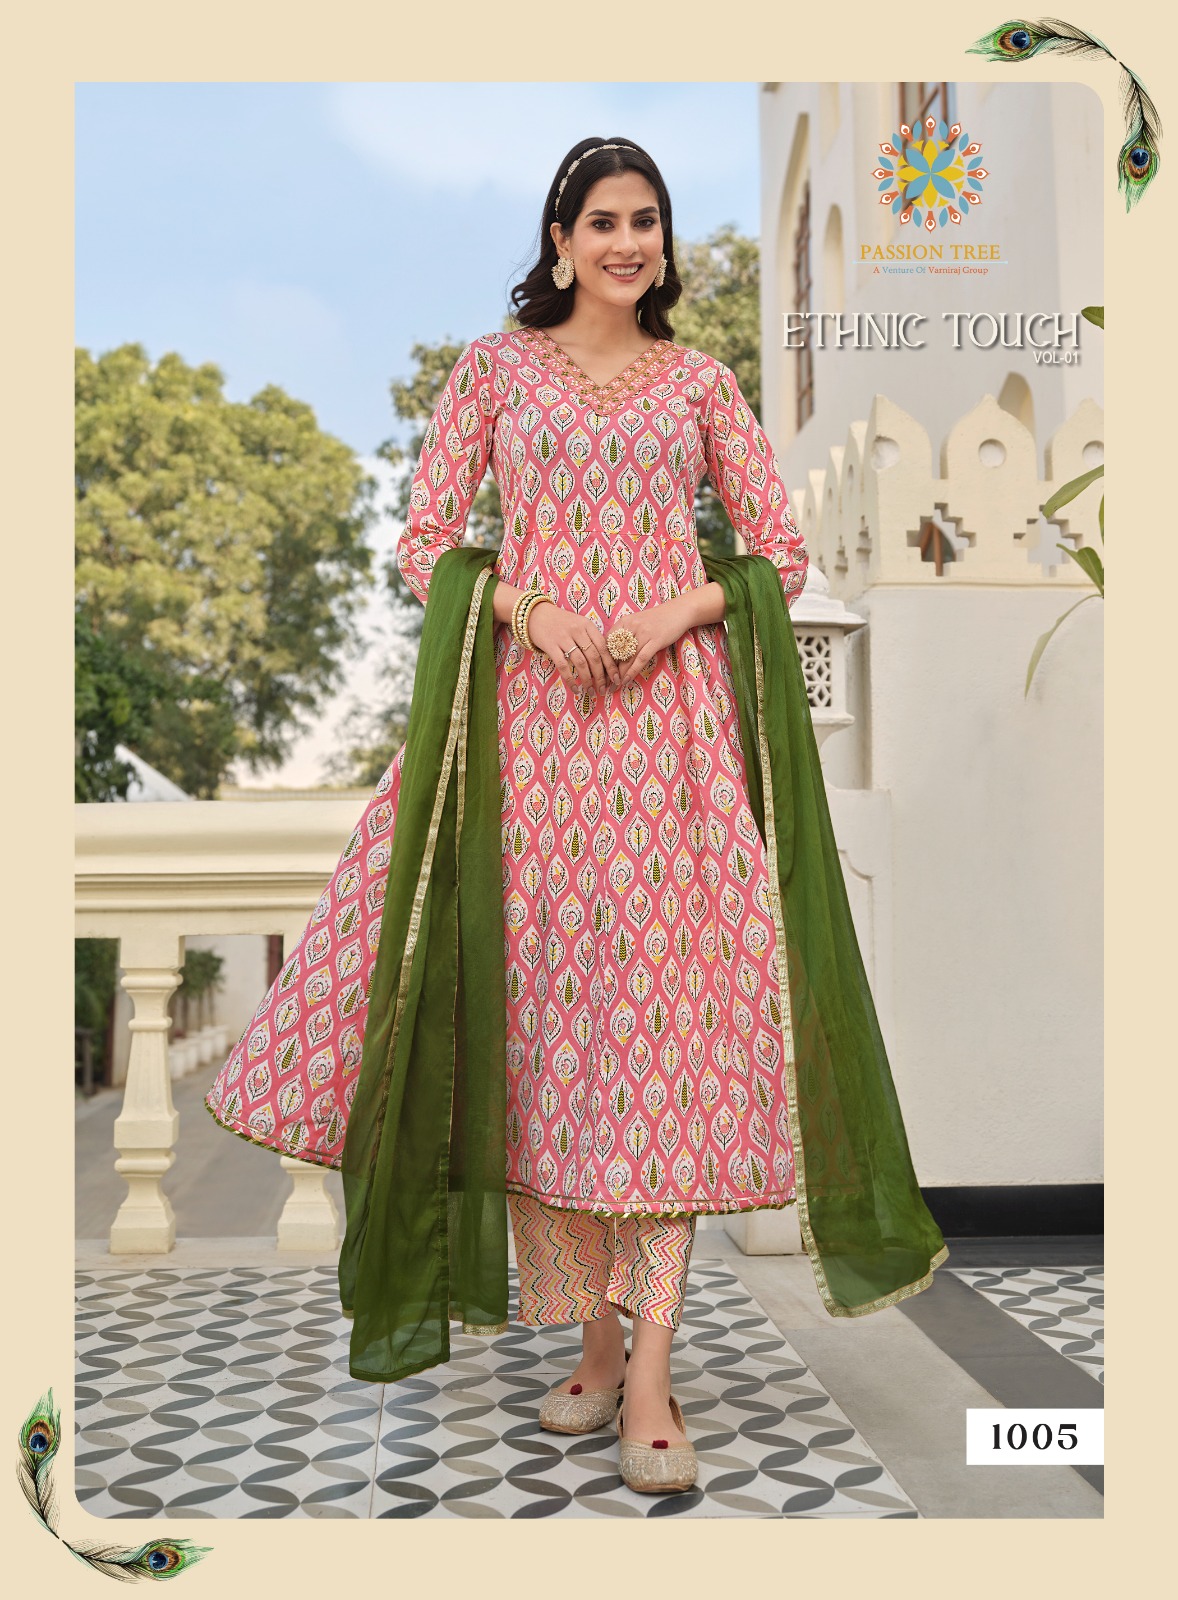 Passion Tree Ethnic Touch Vol 1 collection 4